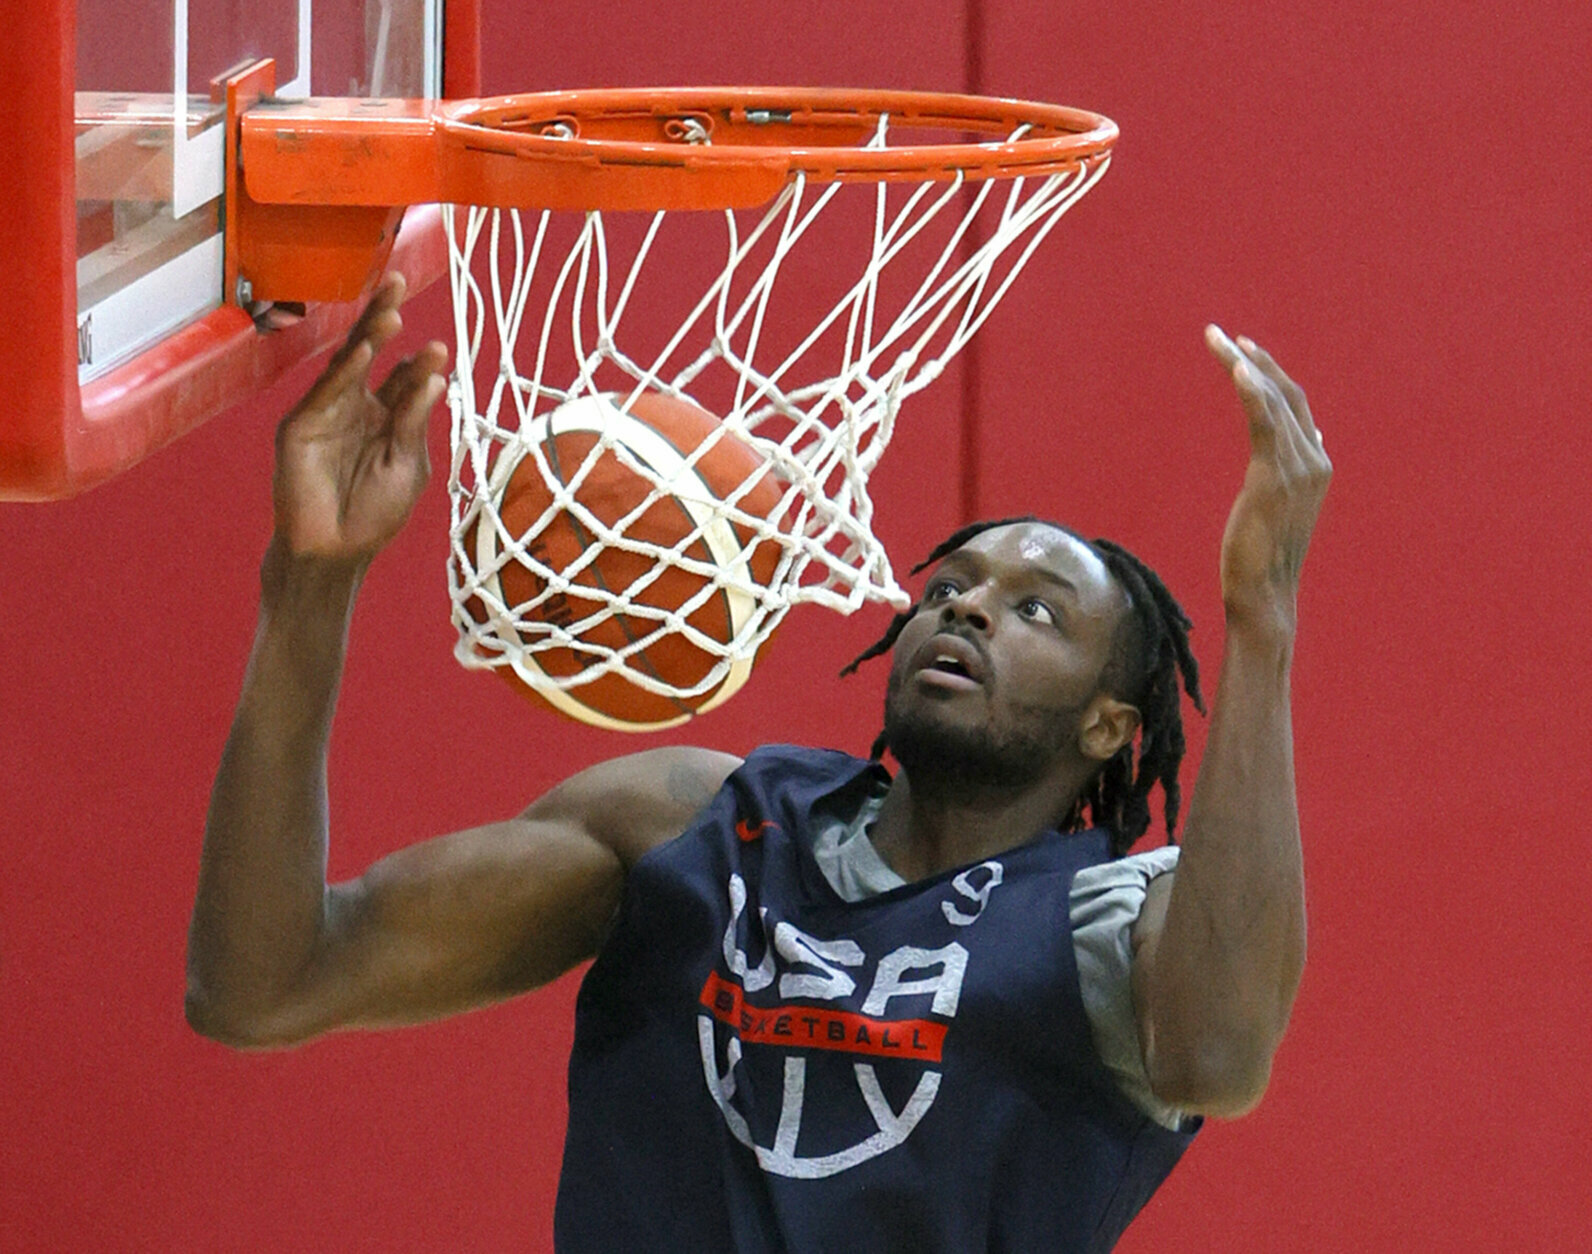 <p><strong>Jerami Grant (Hyattsville, Maryland) — Basketball</strong></p>
<p><strong>Notable facts:</strong> The former four-star recruit from sports powerhouse DeMatha Catholic High School went on to star at Syracuse and was drafted in the second round of the 2014 NBA draft. Grant, who is playing for his fourth NBA team, is the son of former Bullets forward Harvey Grant.</p>
<p><strong>Competition:</strong> July 25 — Aug. 7</p>
